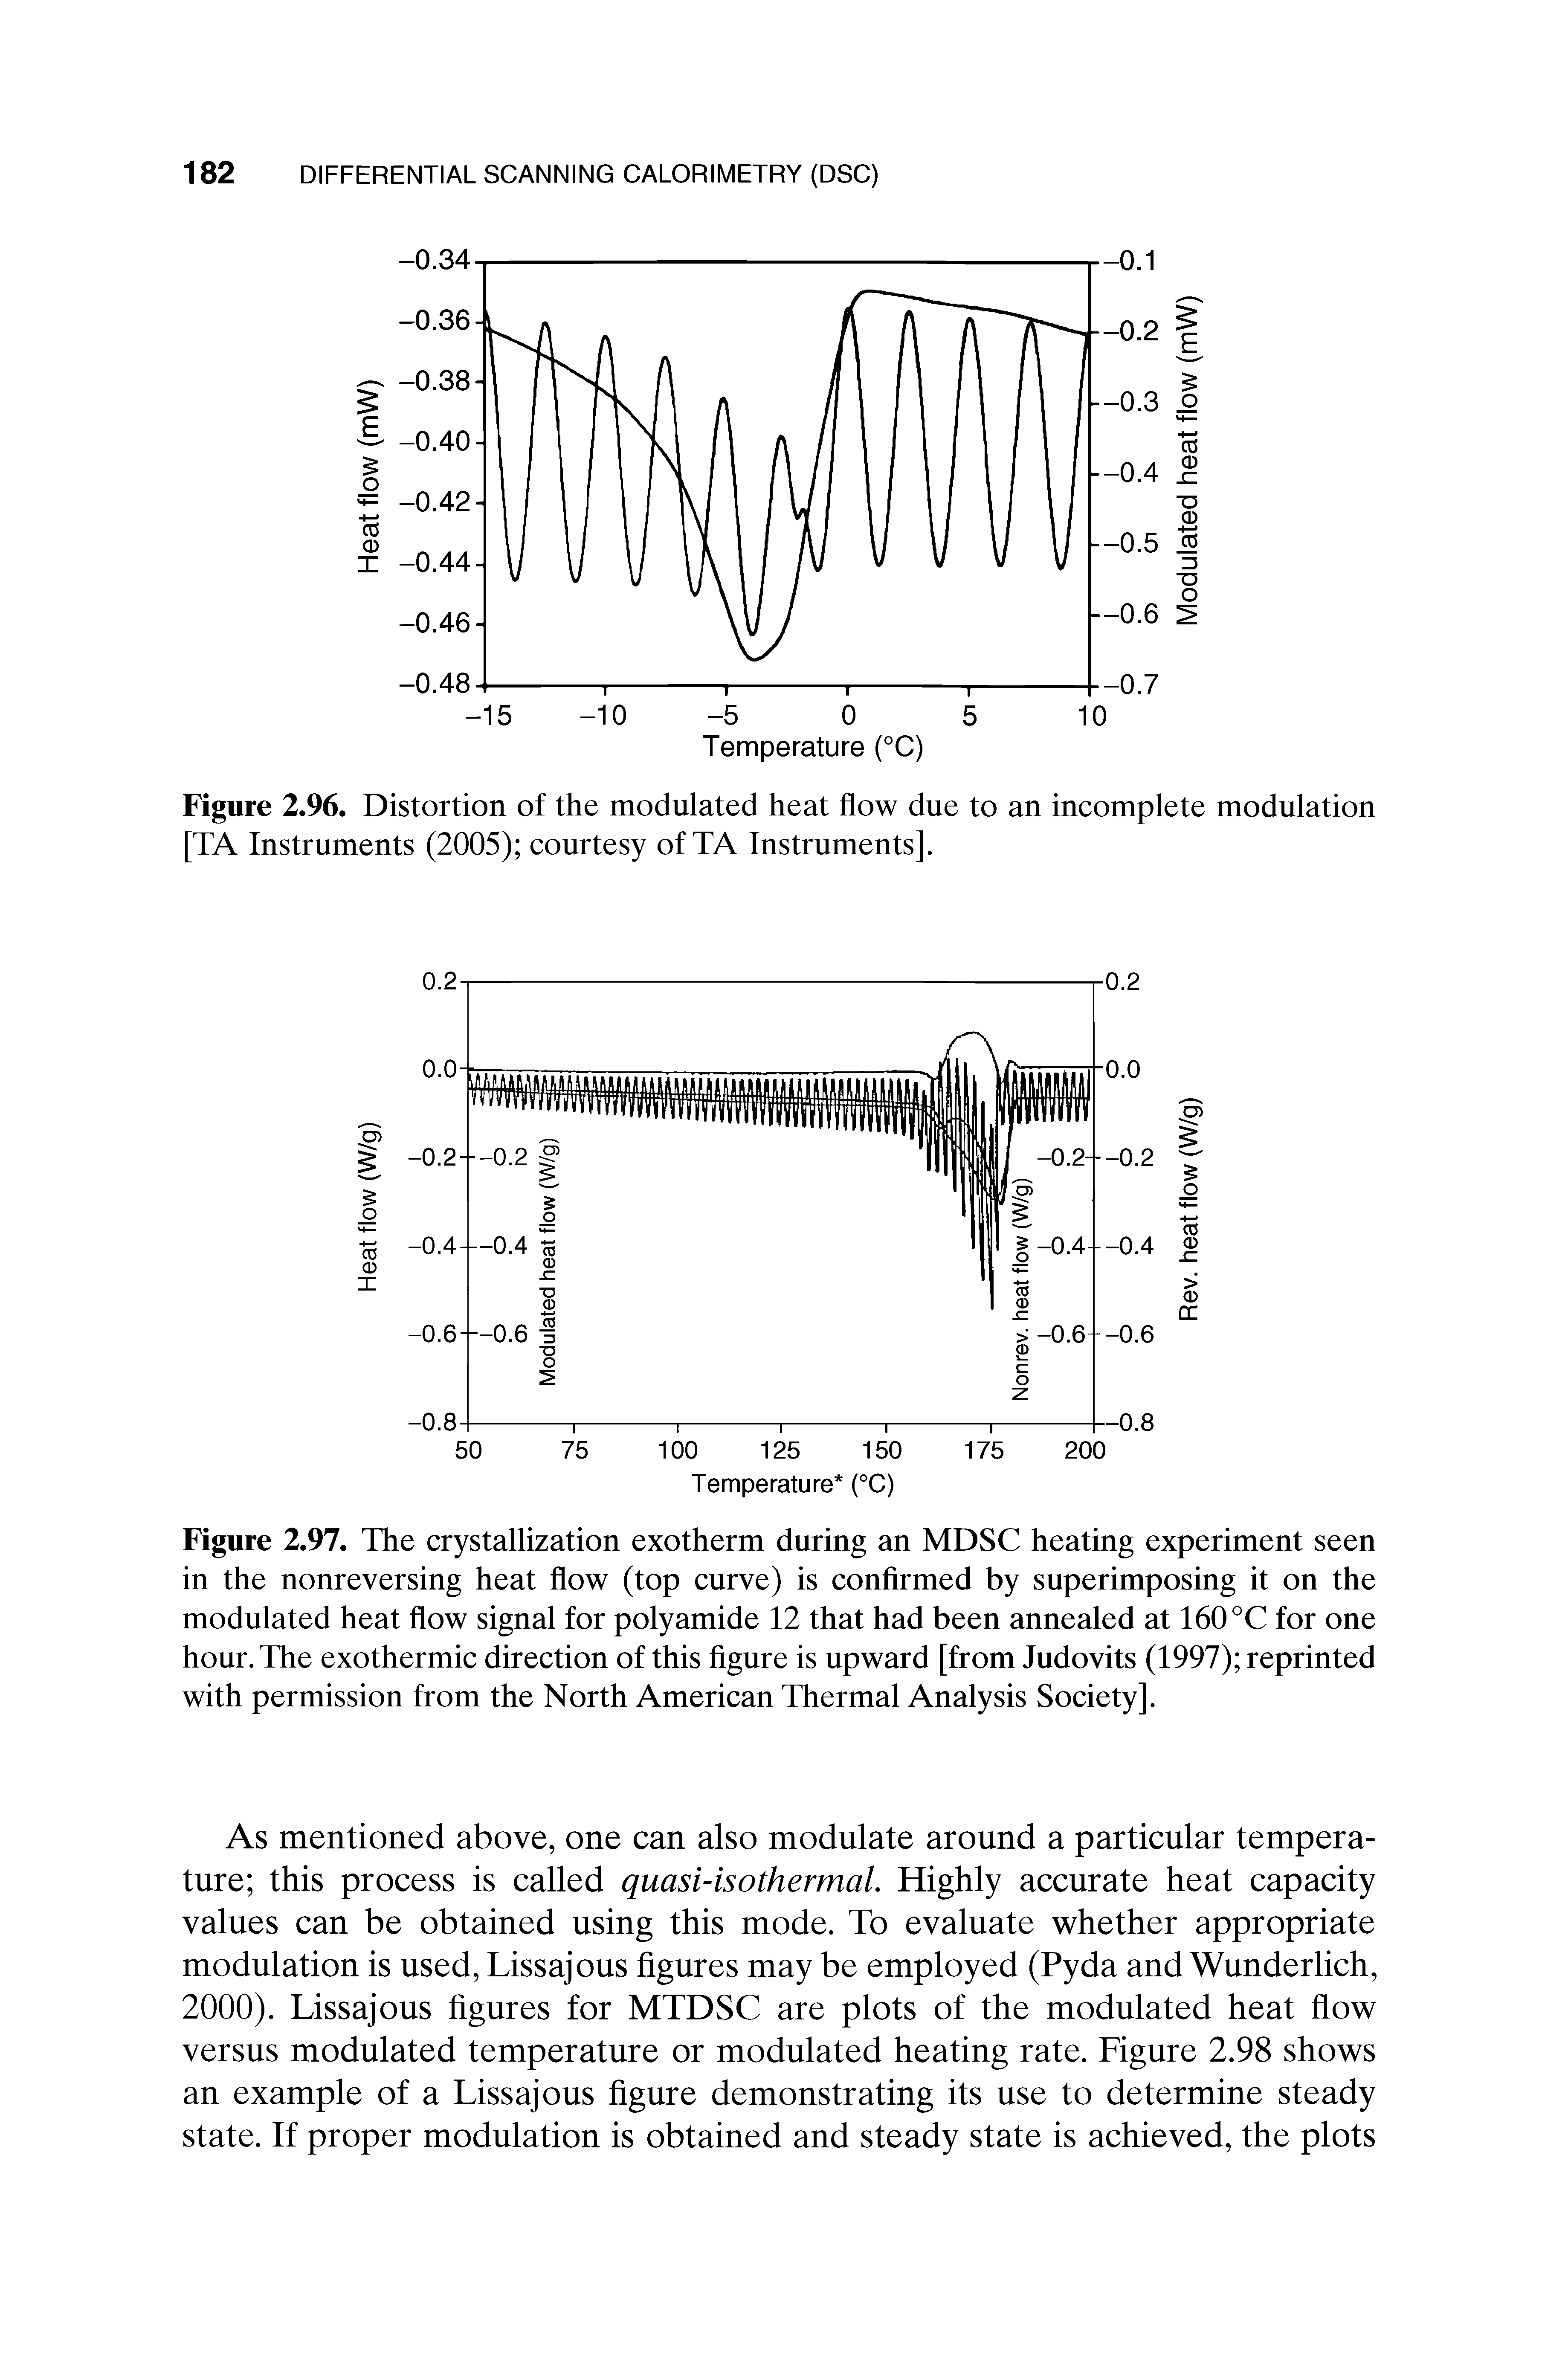 Figure 2.97. The crystallization exotherm during an MDSC heating experiment seen in the nonreversing heat flow (top curve) is confirmed by superimposing it on the modulated heat flow signal for polyamide 12 that had been annealed at 160 °C for one hour. The exothermic direction of this figure is upward [from Judovits (1997) reprinted with permission from the North American Thermal Analysis Society].